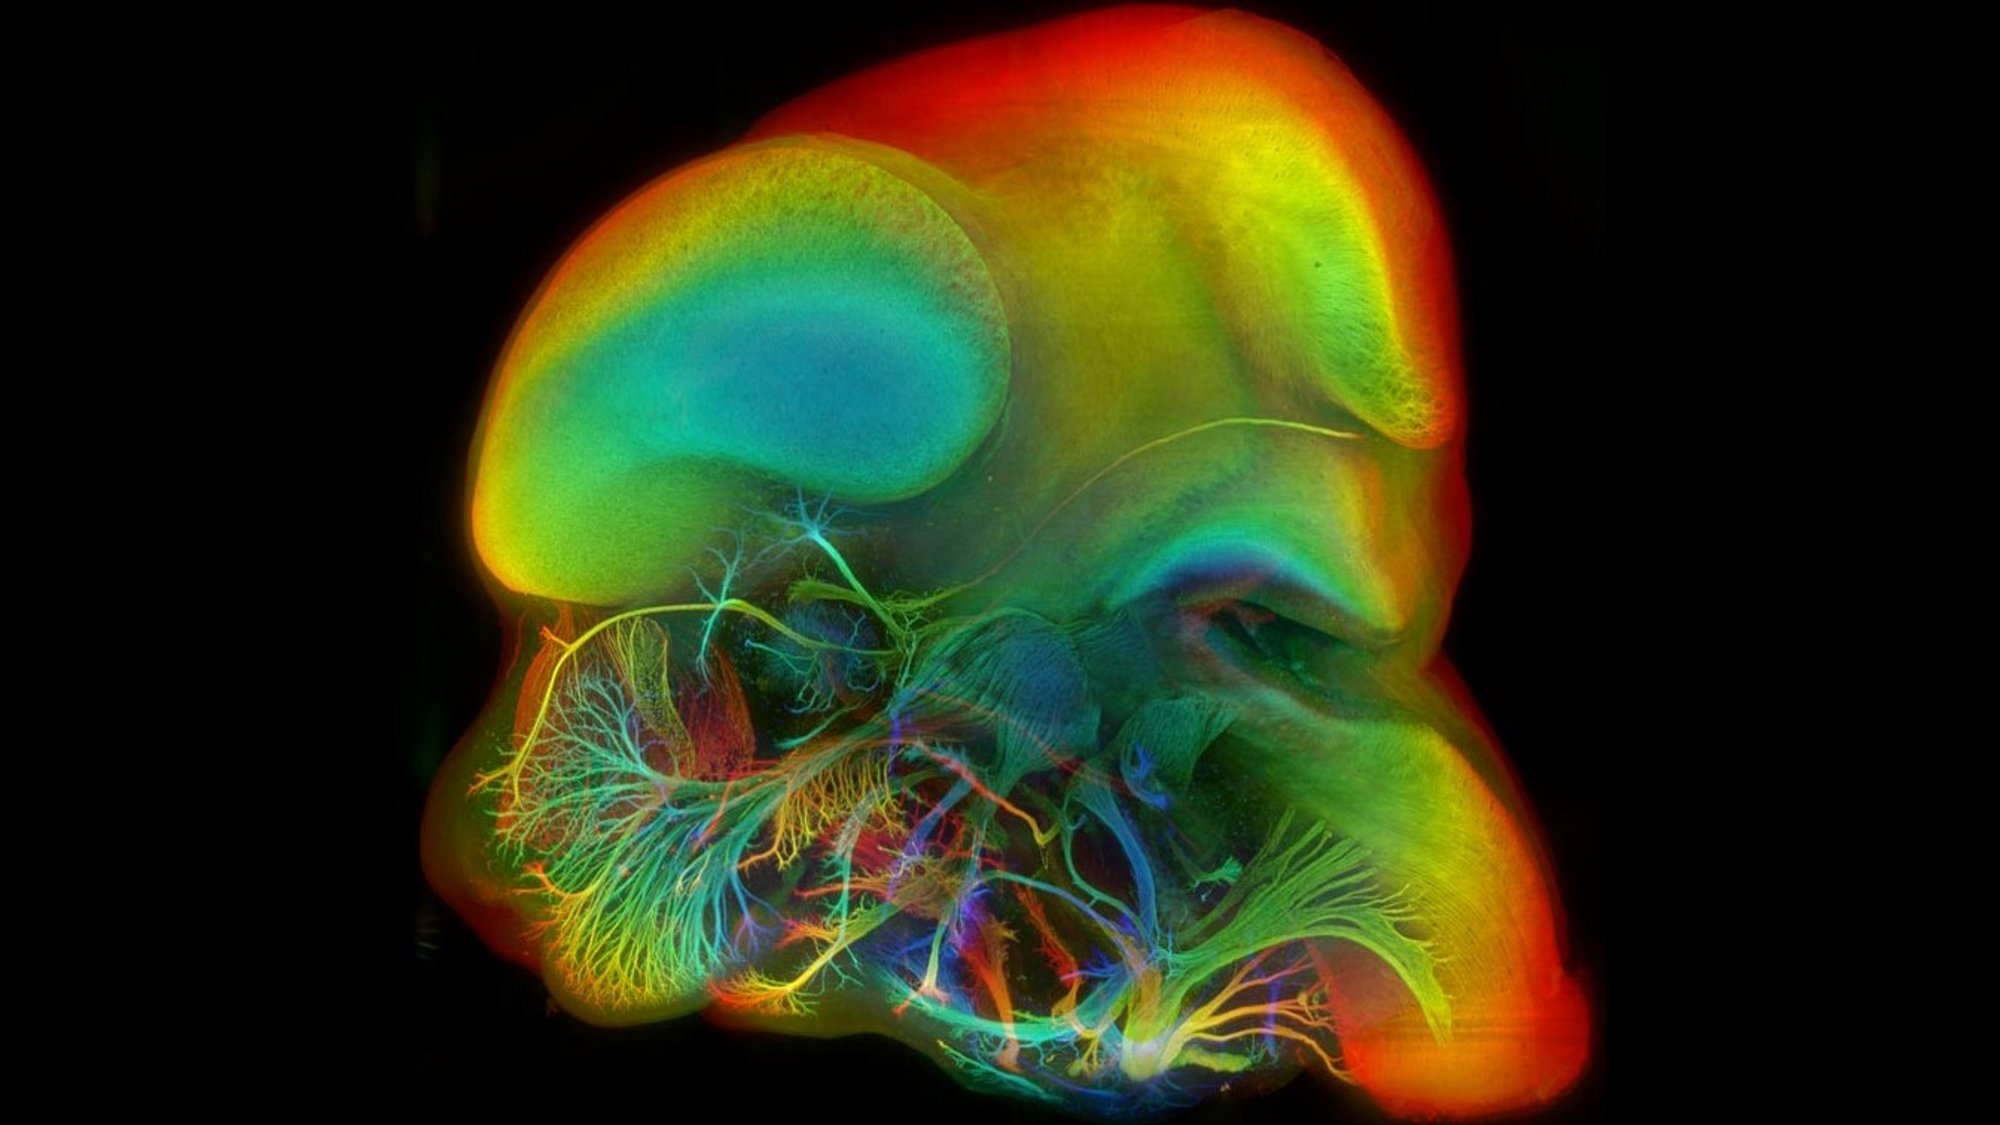 Visualisation of neural precursor tissue, chemically treated to make it optically transparent, and scanned using a Selective Plane Illumination Microscope (SPIM), Image by Comal, Mayer and Swoger (CRG)